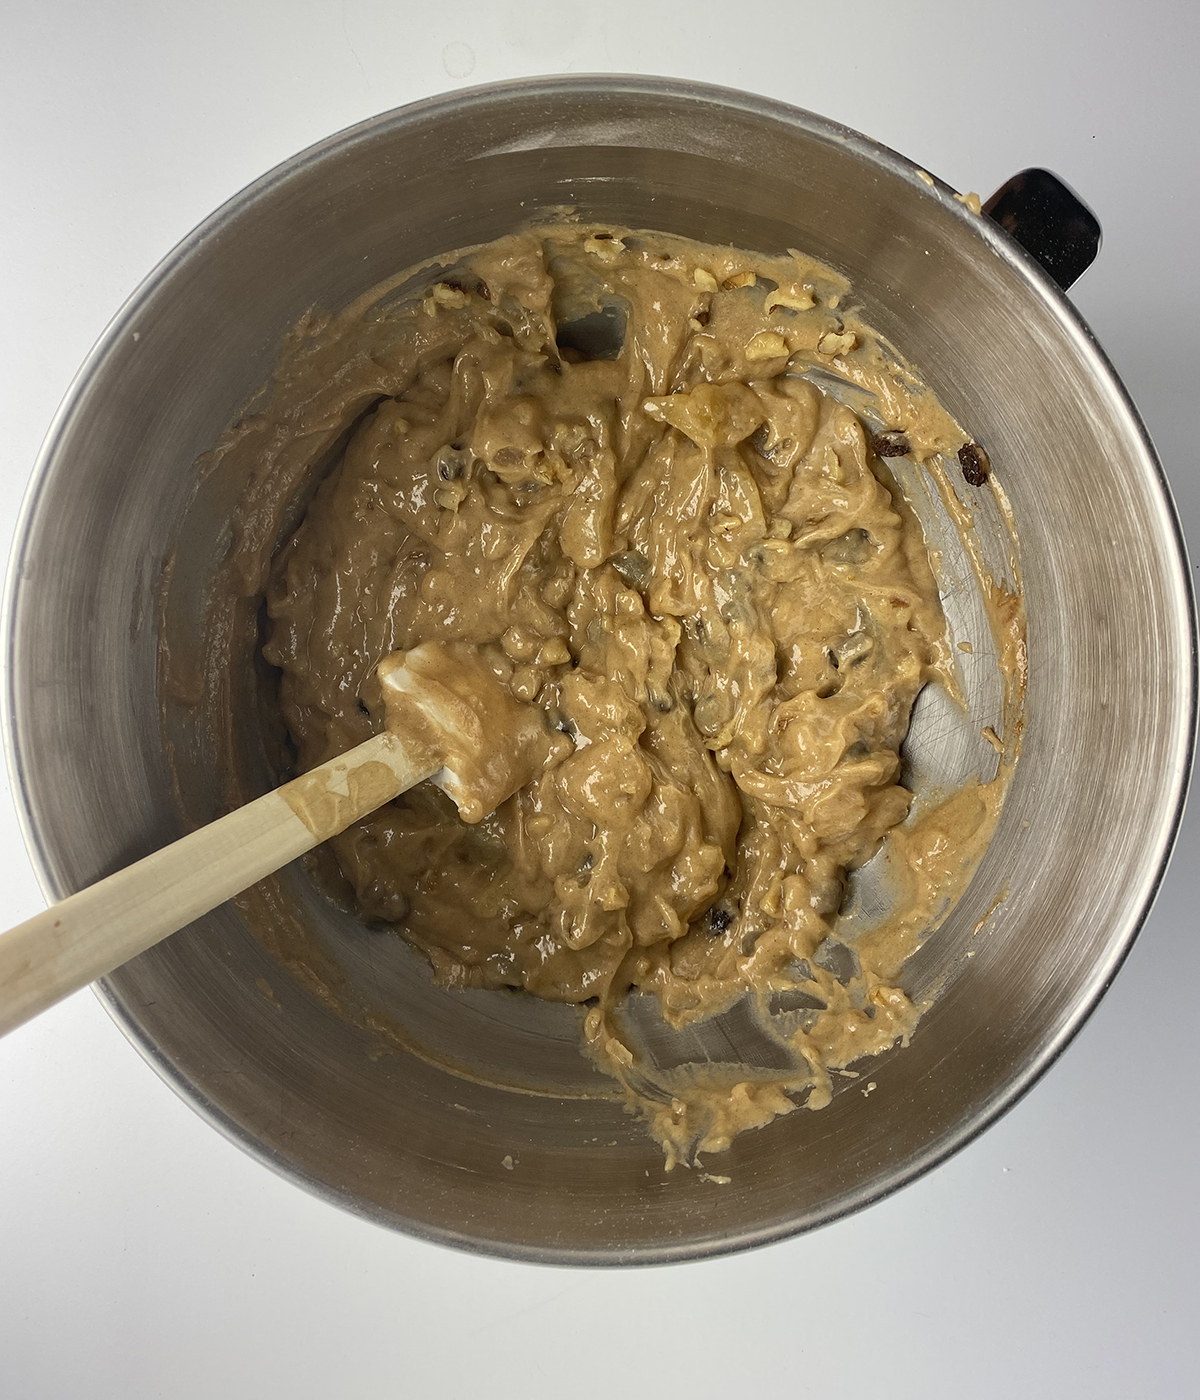 Mixing nuts and raisins into apple cake batter